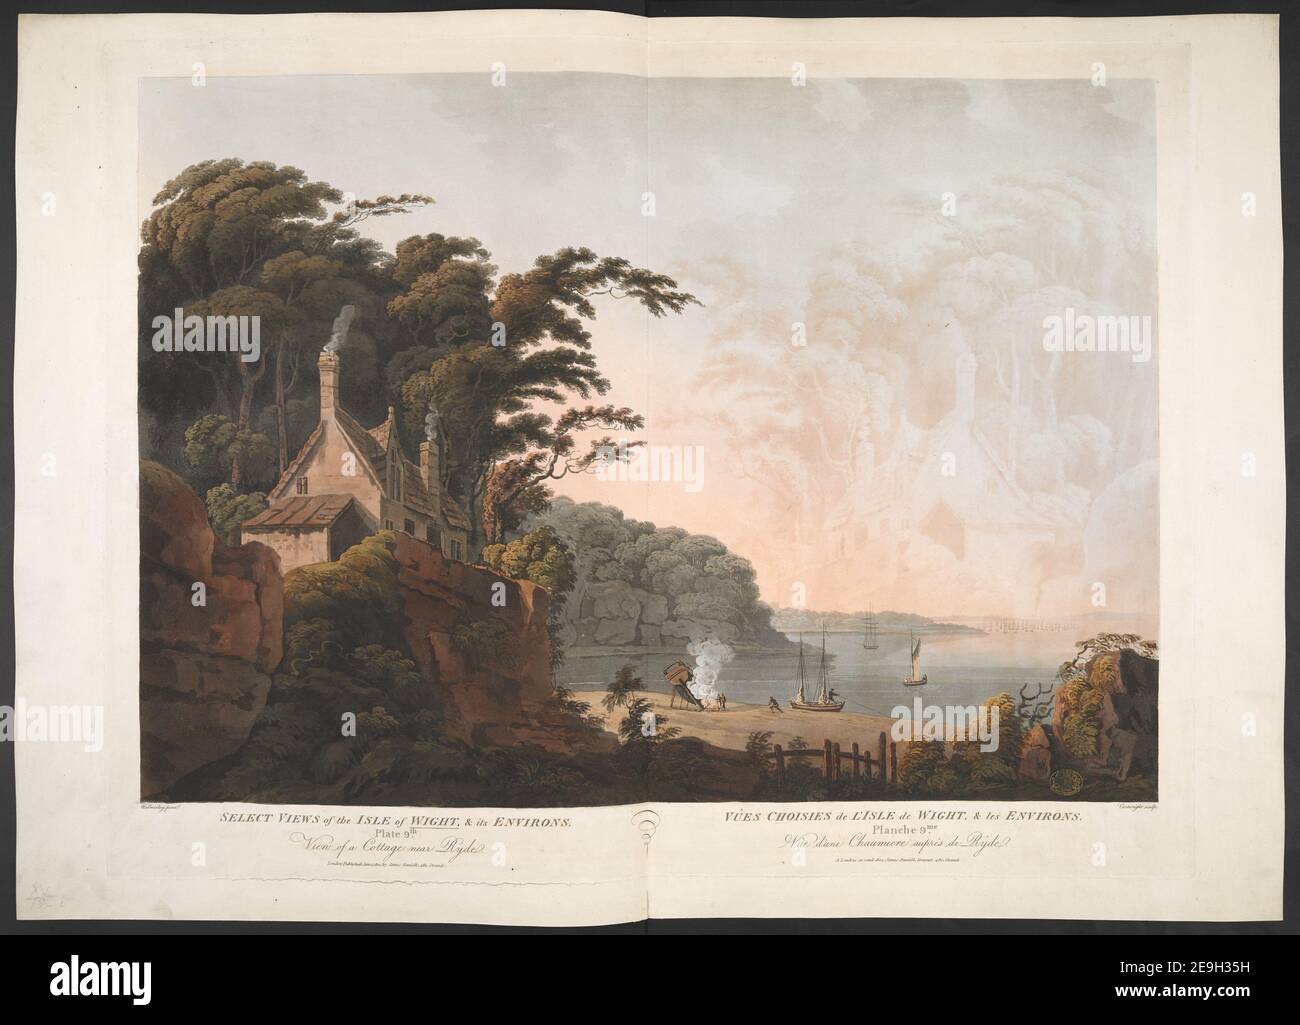 SELECT VIEWS of the ISLE of WIGHT, & its ENVIRONS, Plate 9th. View of a Cottage near Ryde. = VUÃÇES CHOISIES de L'ISLE de WIGHT, & les ENVIRONS. Planche 9me VuÃÇe d'une Chaumiere aupreÃÄs de RyÃÇde.  Author  Cartwright, Thomas 15.15.i. Place of publication: London Publisher: Published Jan 1 1810 James Daniell , Co No480 Strand., Date of publication: [January 1 1810]  Item type: 1 print Medium: aquatint and etching with hand-colouring Dimensions: platemark 55.9 x 72.6 cm, on sheet 60.3 x 84.7 cm  Former owner: George III, King of Great Britain, 1738-1820 Stock Photo